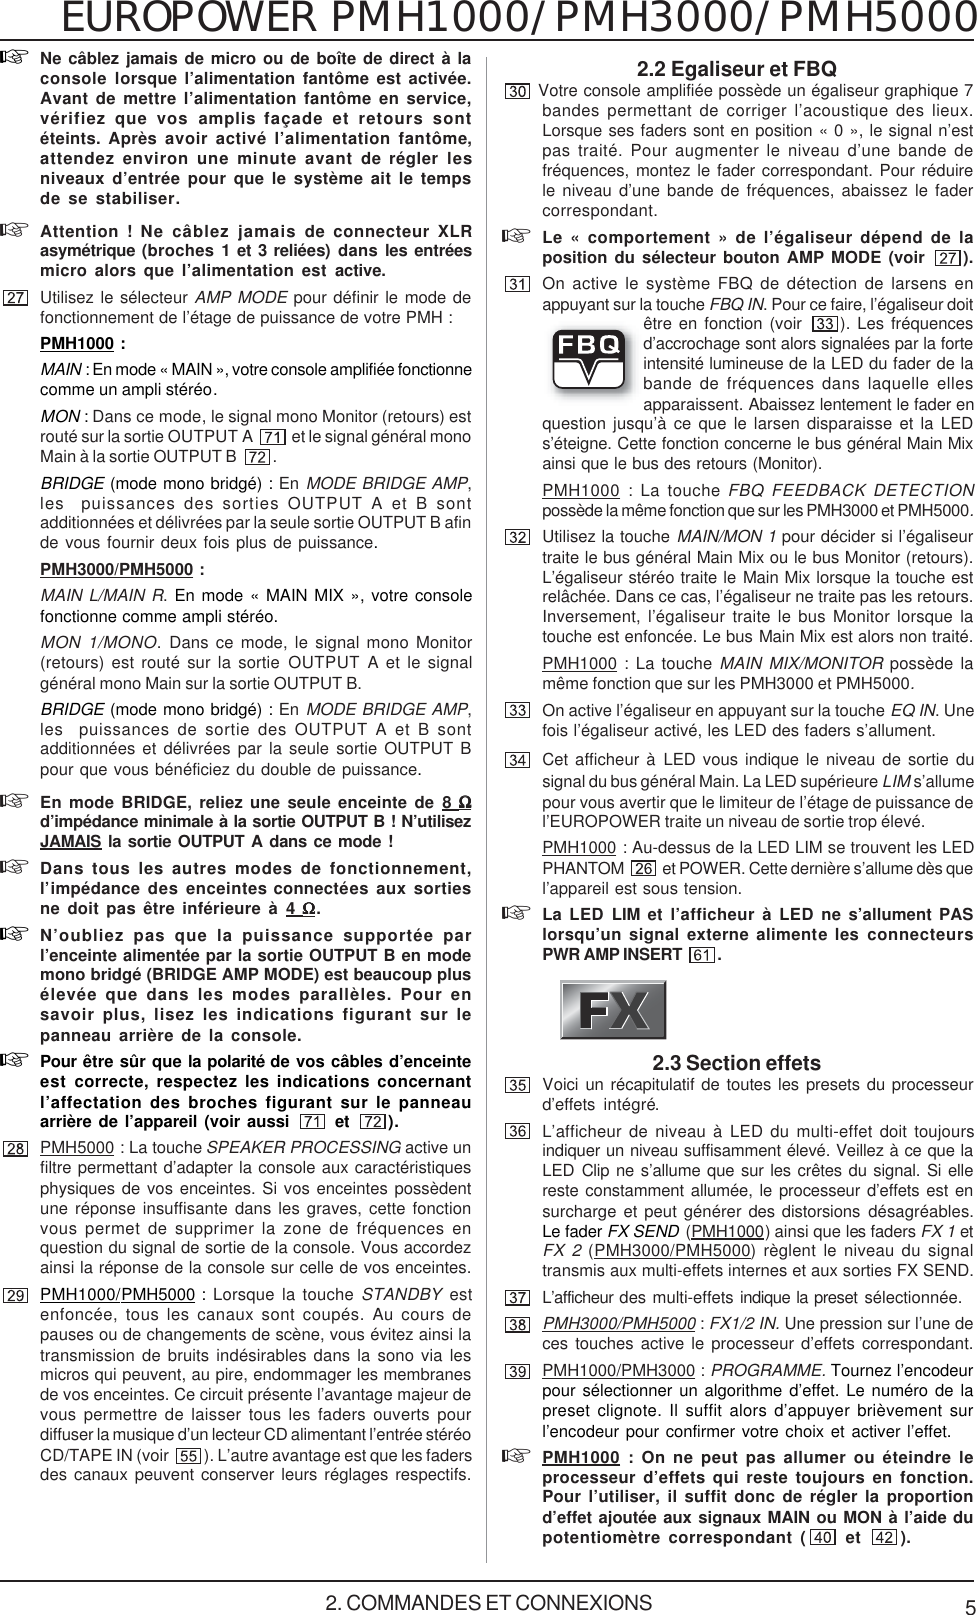 Page 5 of 12 - Behringer PMH1000 User Manual (French) P0115 M FR